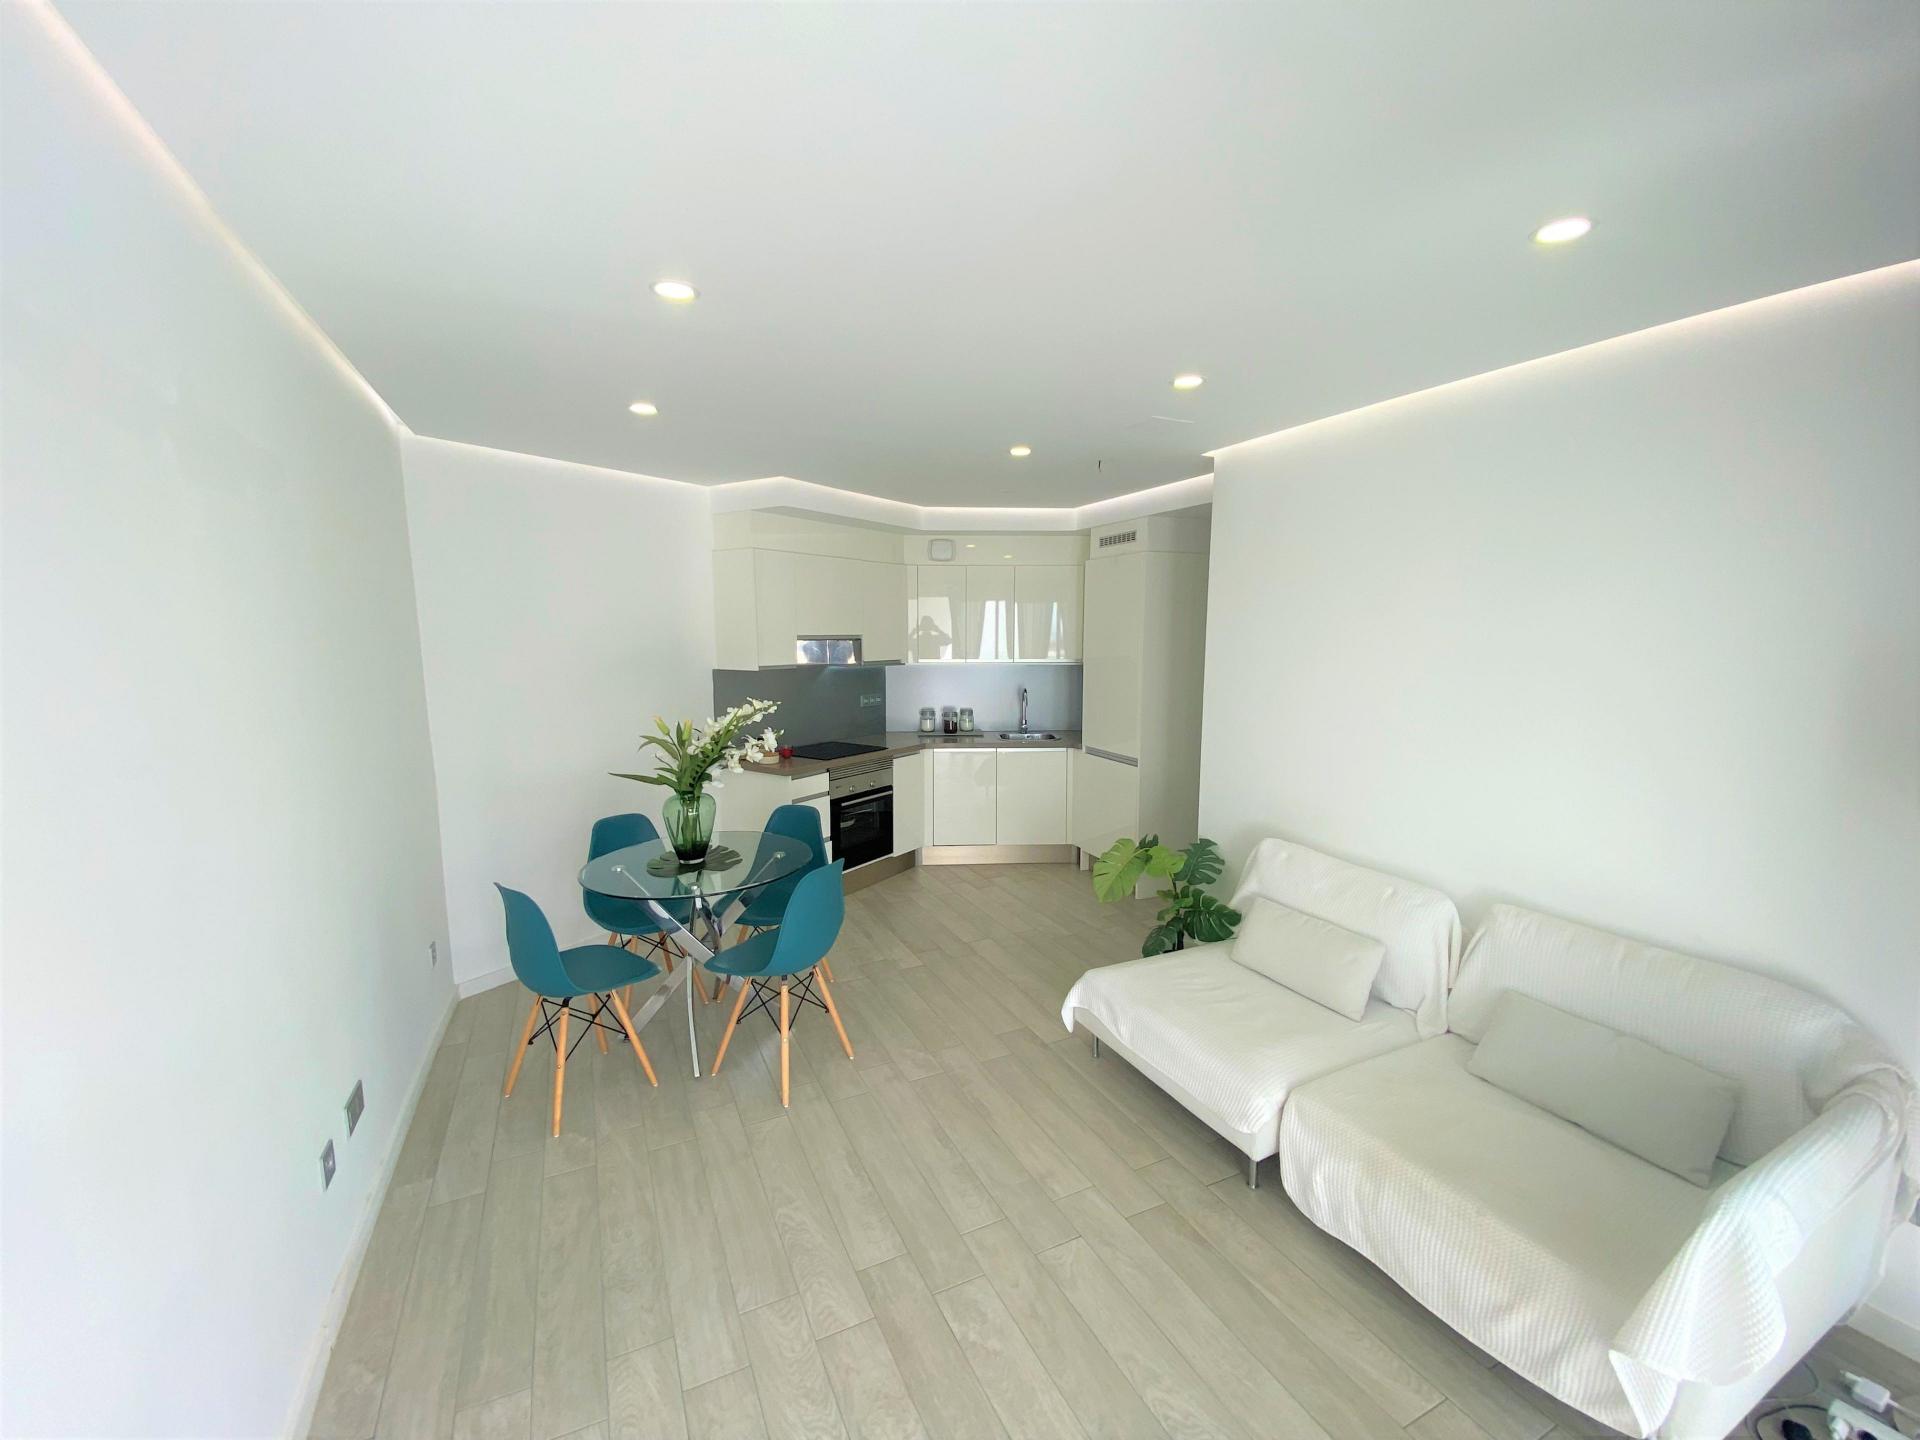 Apartment in Playa Paraiso marketed by Tenerifehome